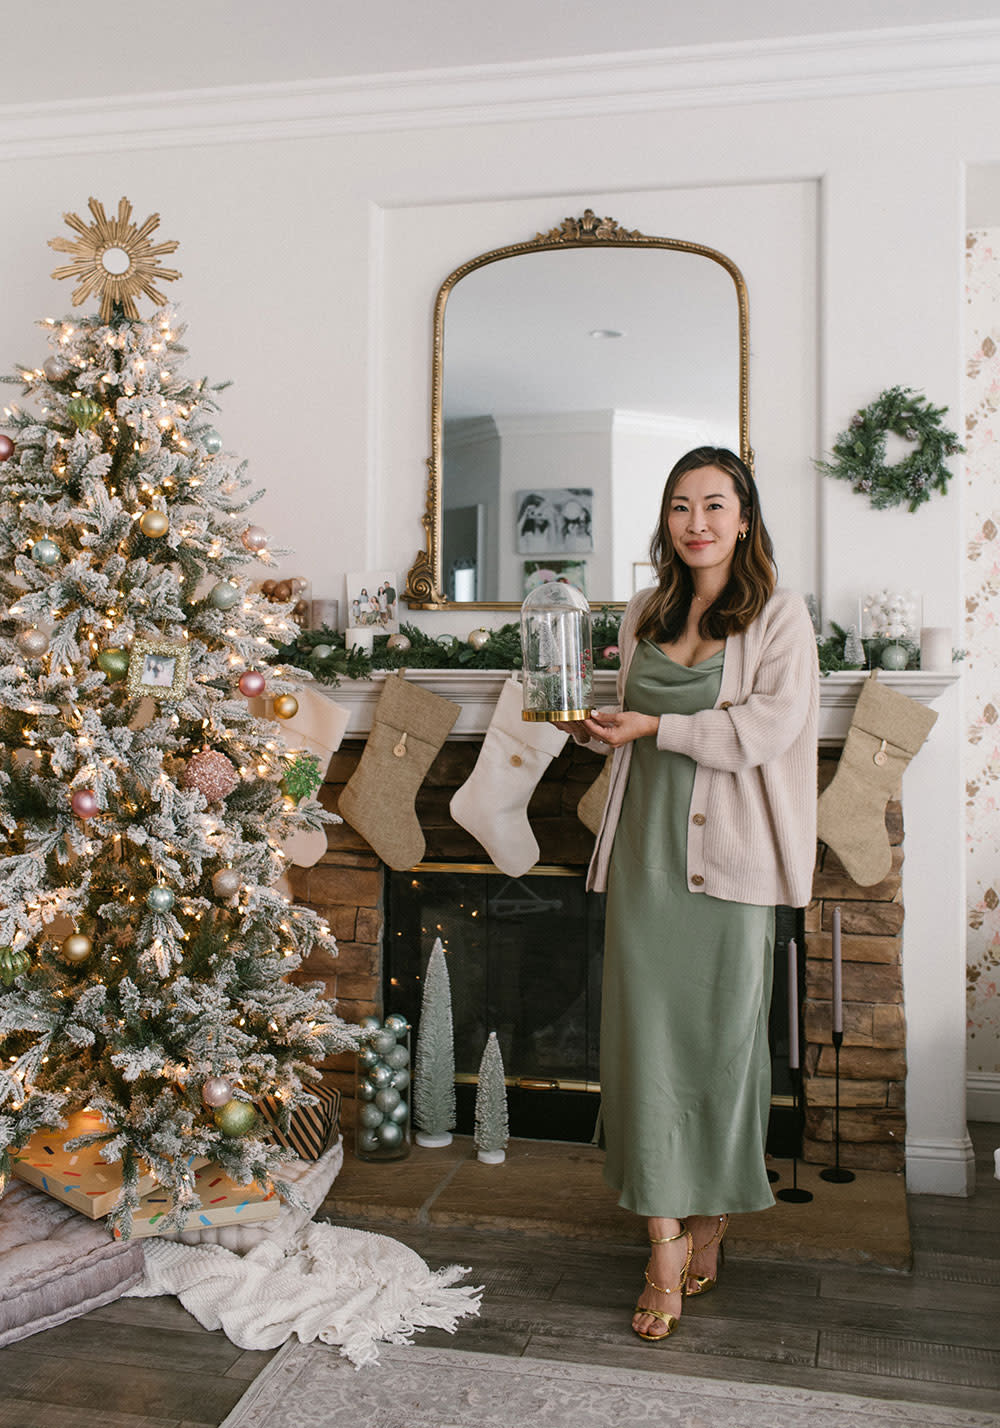 Angela Kim likes to get into the holiday spirit by decorating her family's home, listening to Christmas songs and wearing matching festive pajamas. (Photo courtesy of Angela Kim/Mommy Diary)